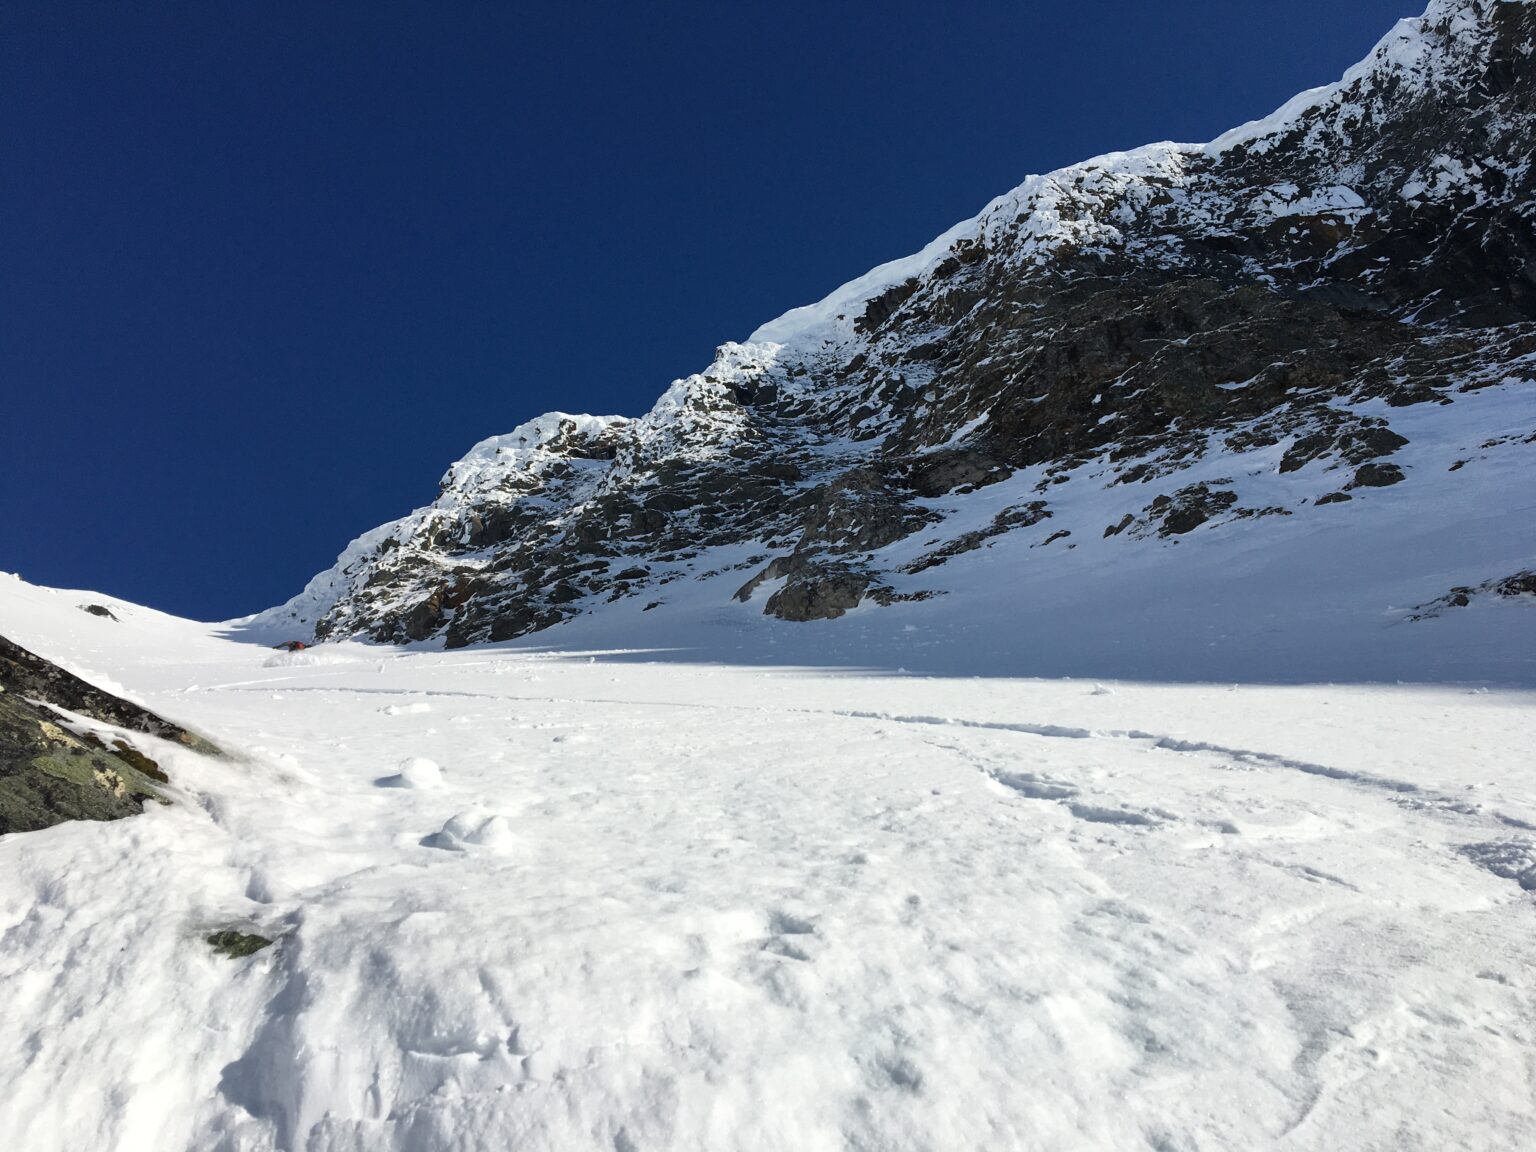 Looking up the chute on Cahcevahnjunni